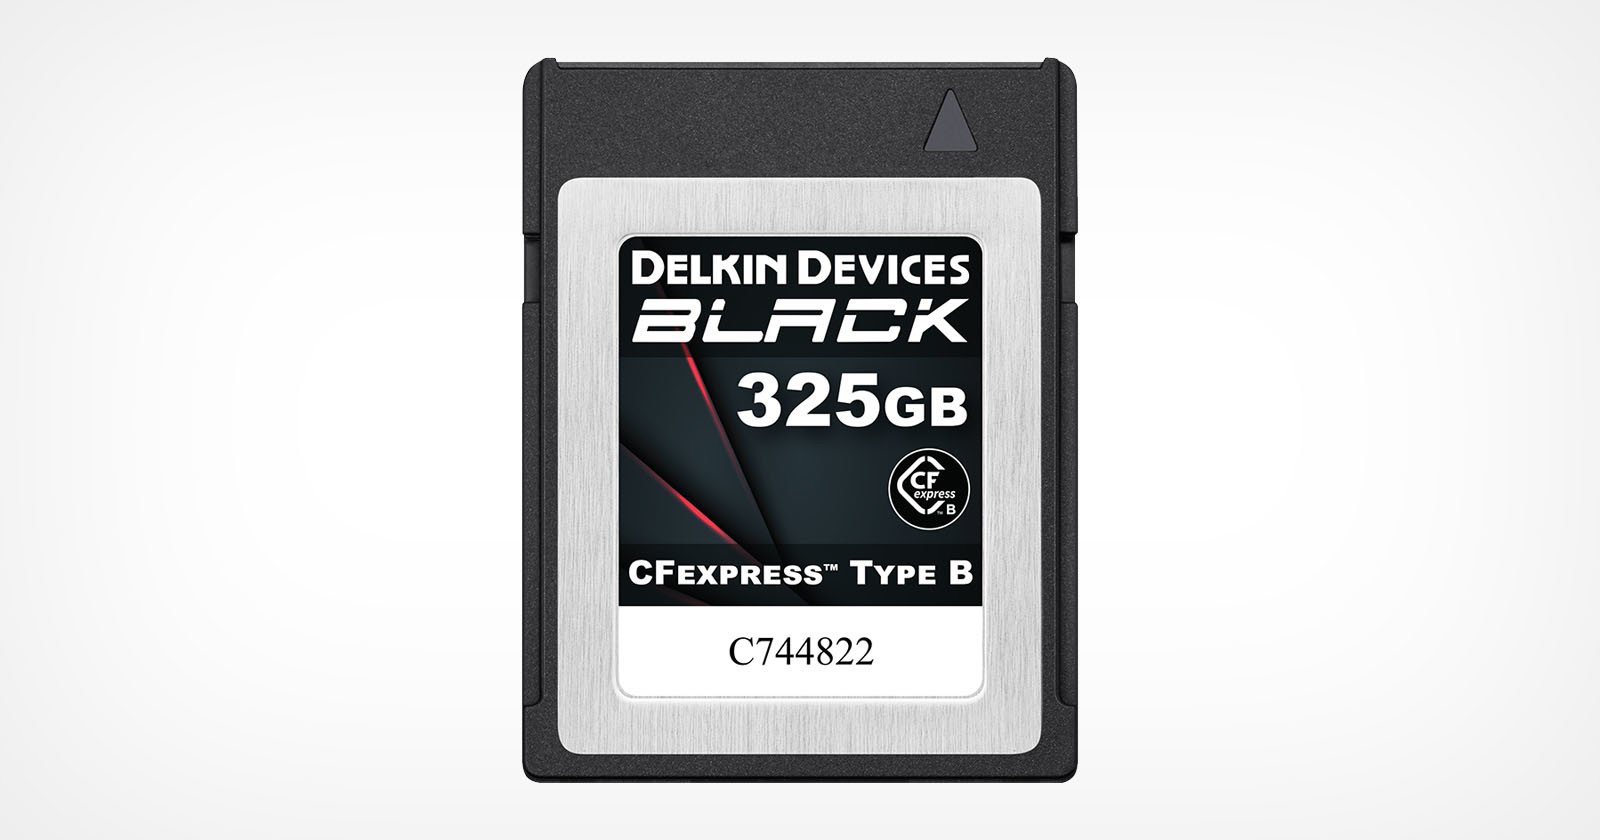 Delkins Black Series CFexpress Cards Make Lofty Speed Promises